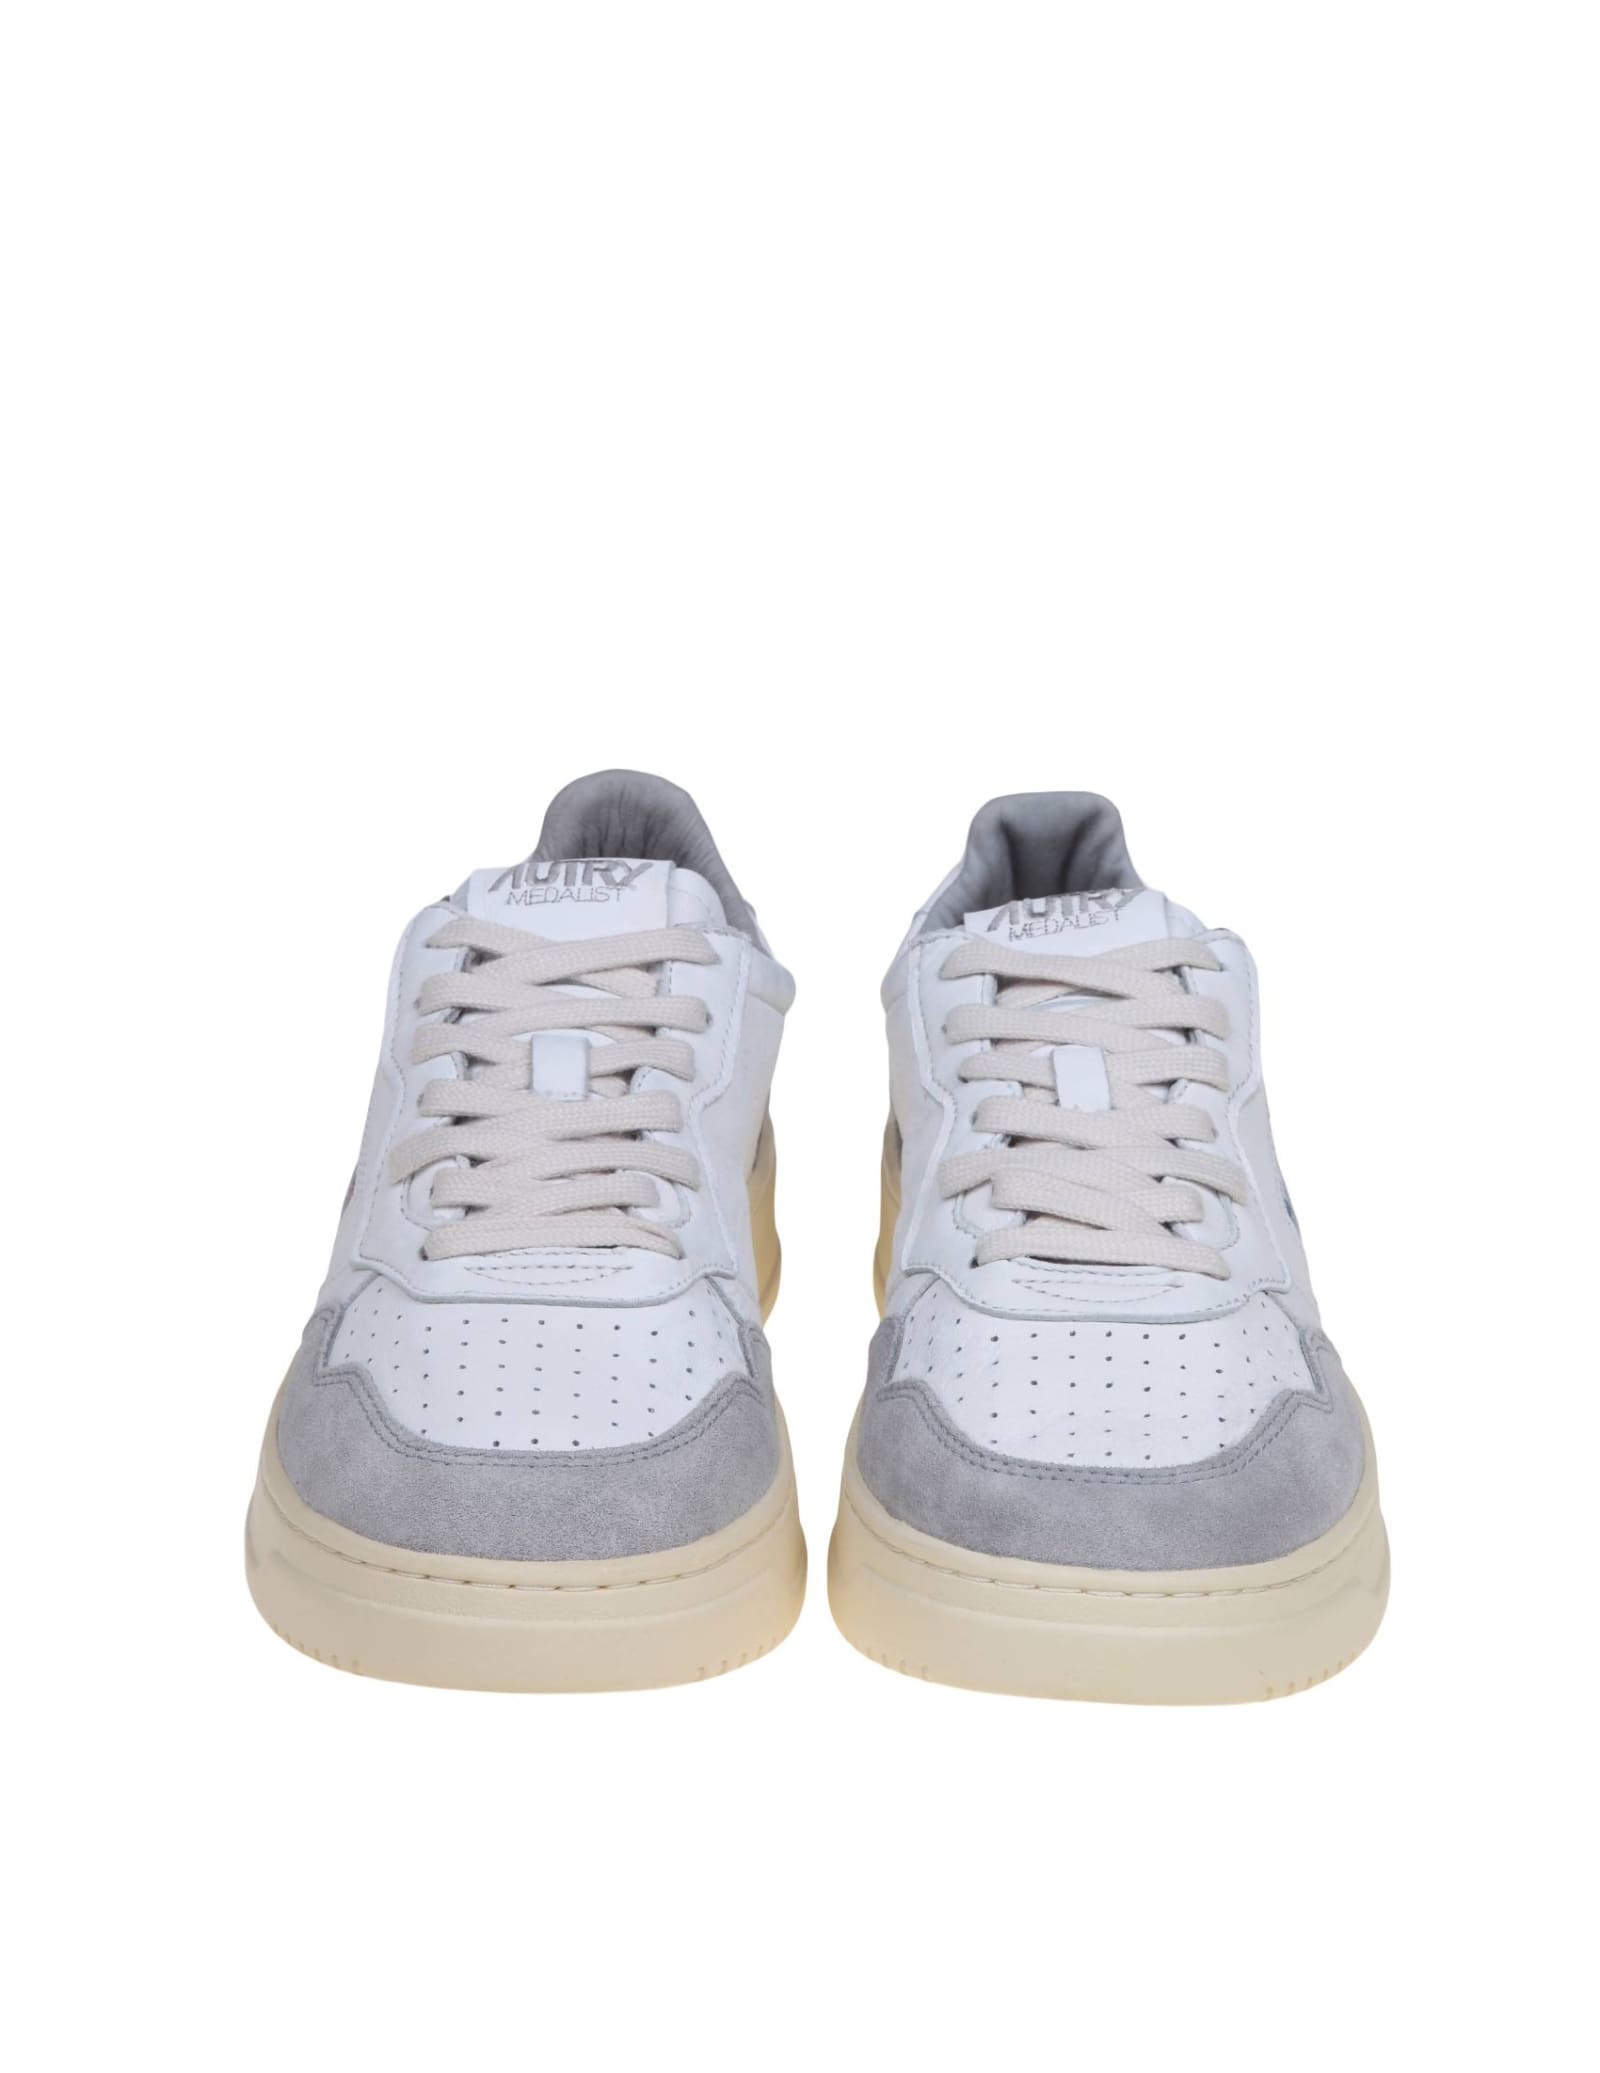 Shop Autry Sneakers In White And Gray Leather And Suede In White Grey